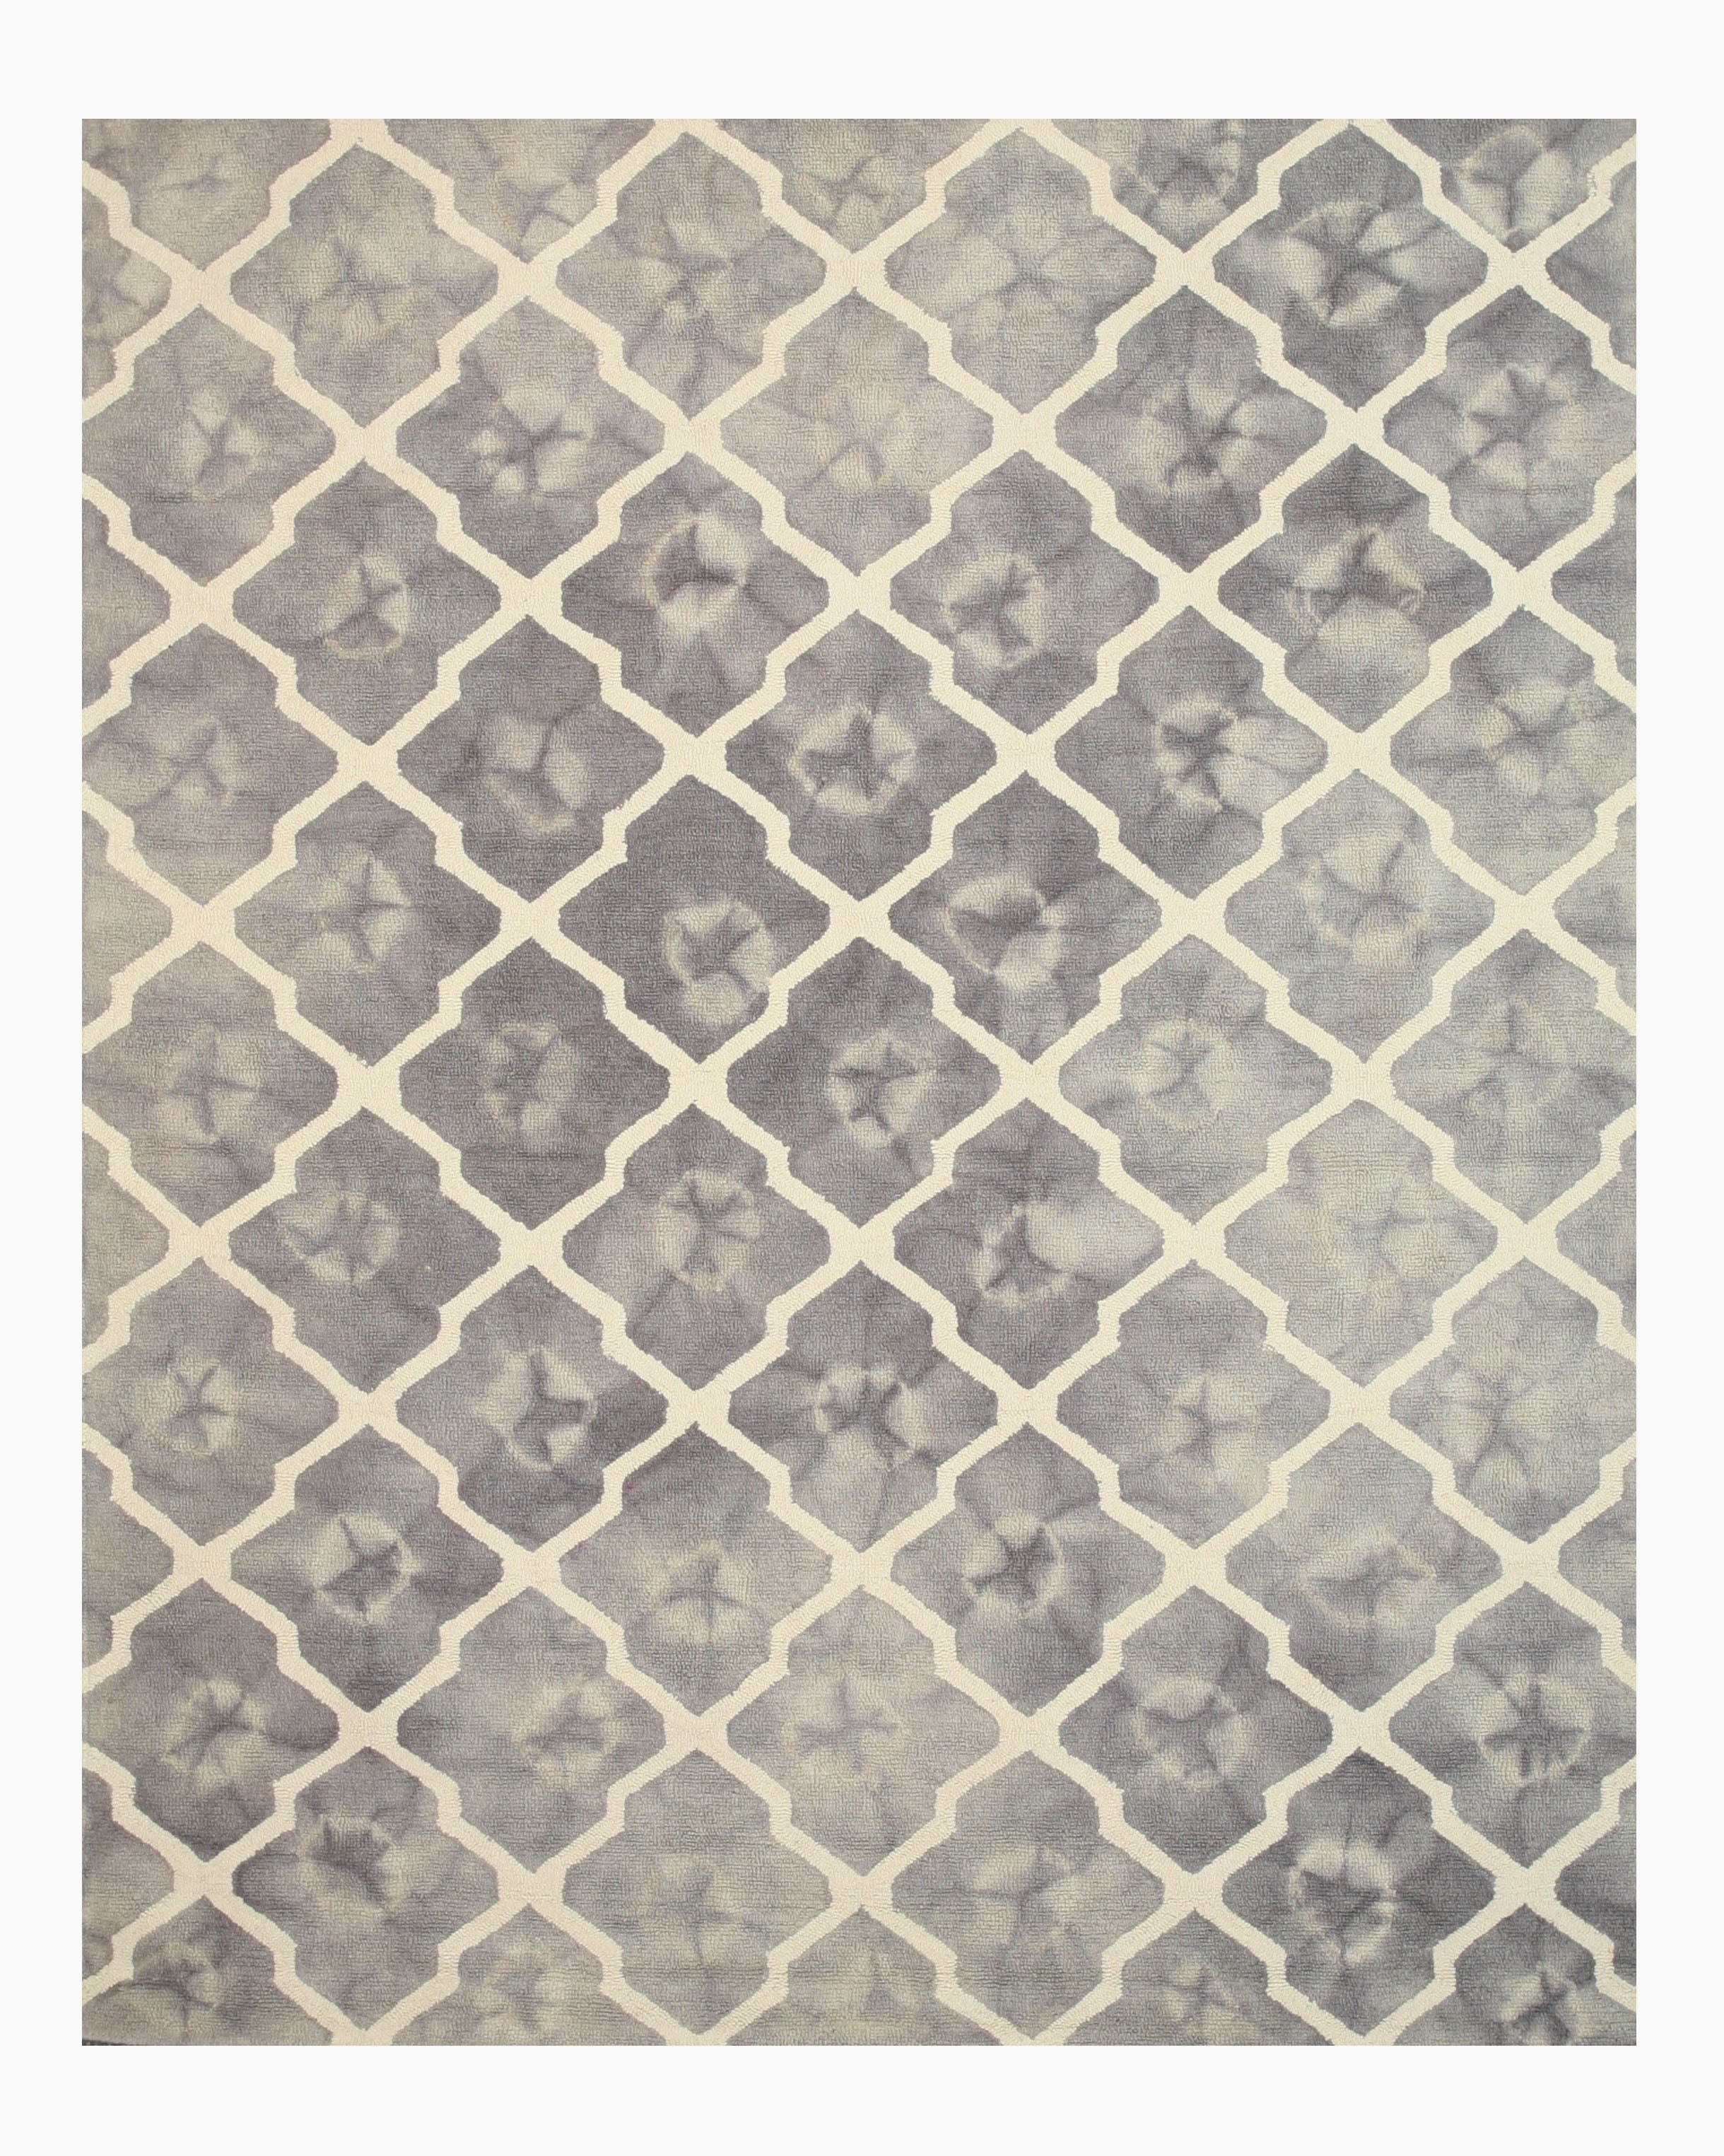 EORC Hand-tufted Wool Gray Transitional Geometric Tie-dye Moroccan Rug